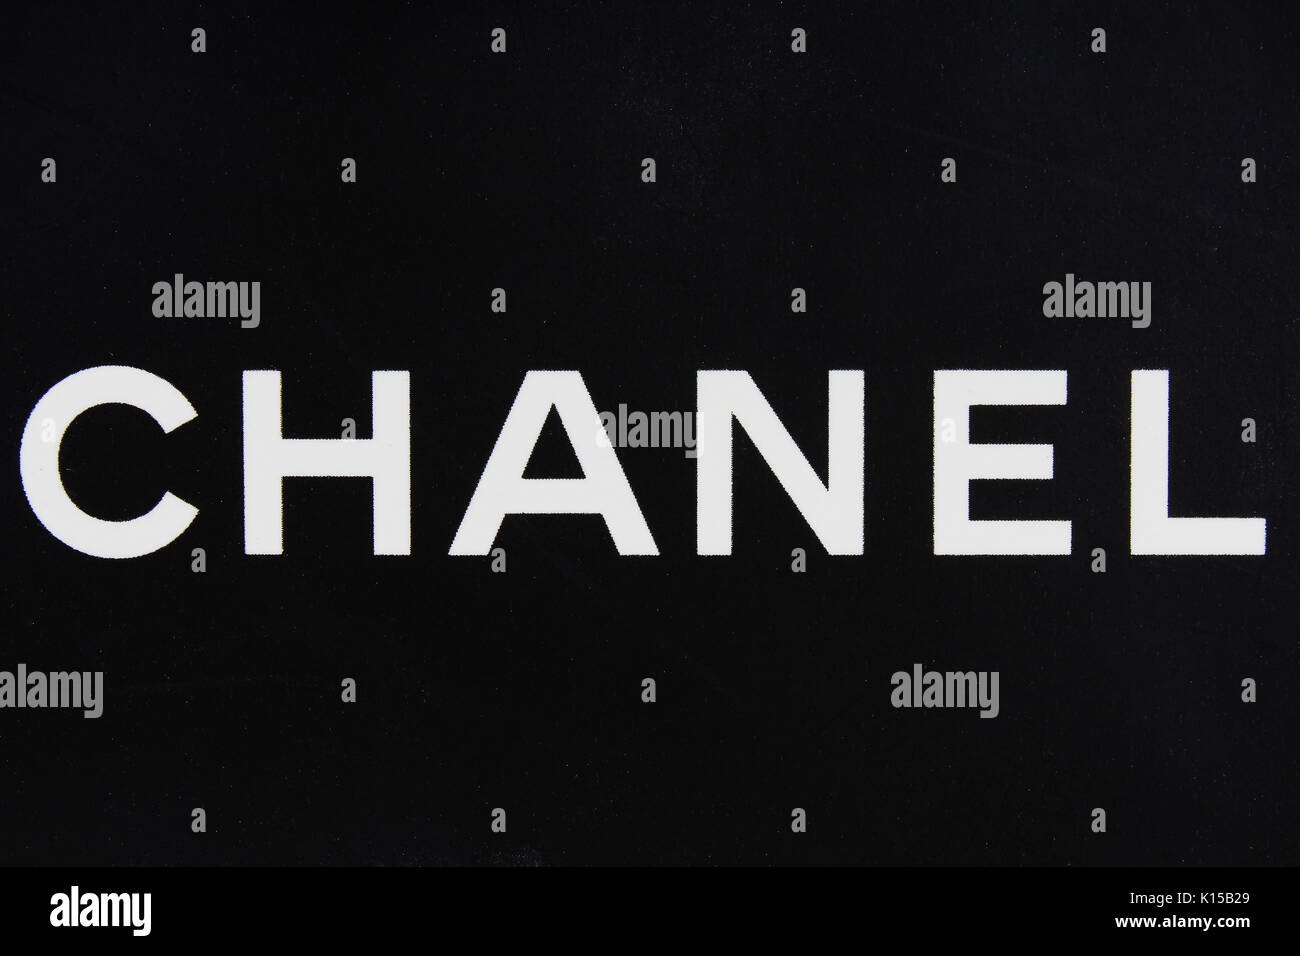 Chanel letters. Chanel logo from Stock Photo - Alamy